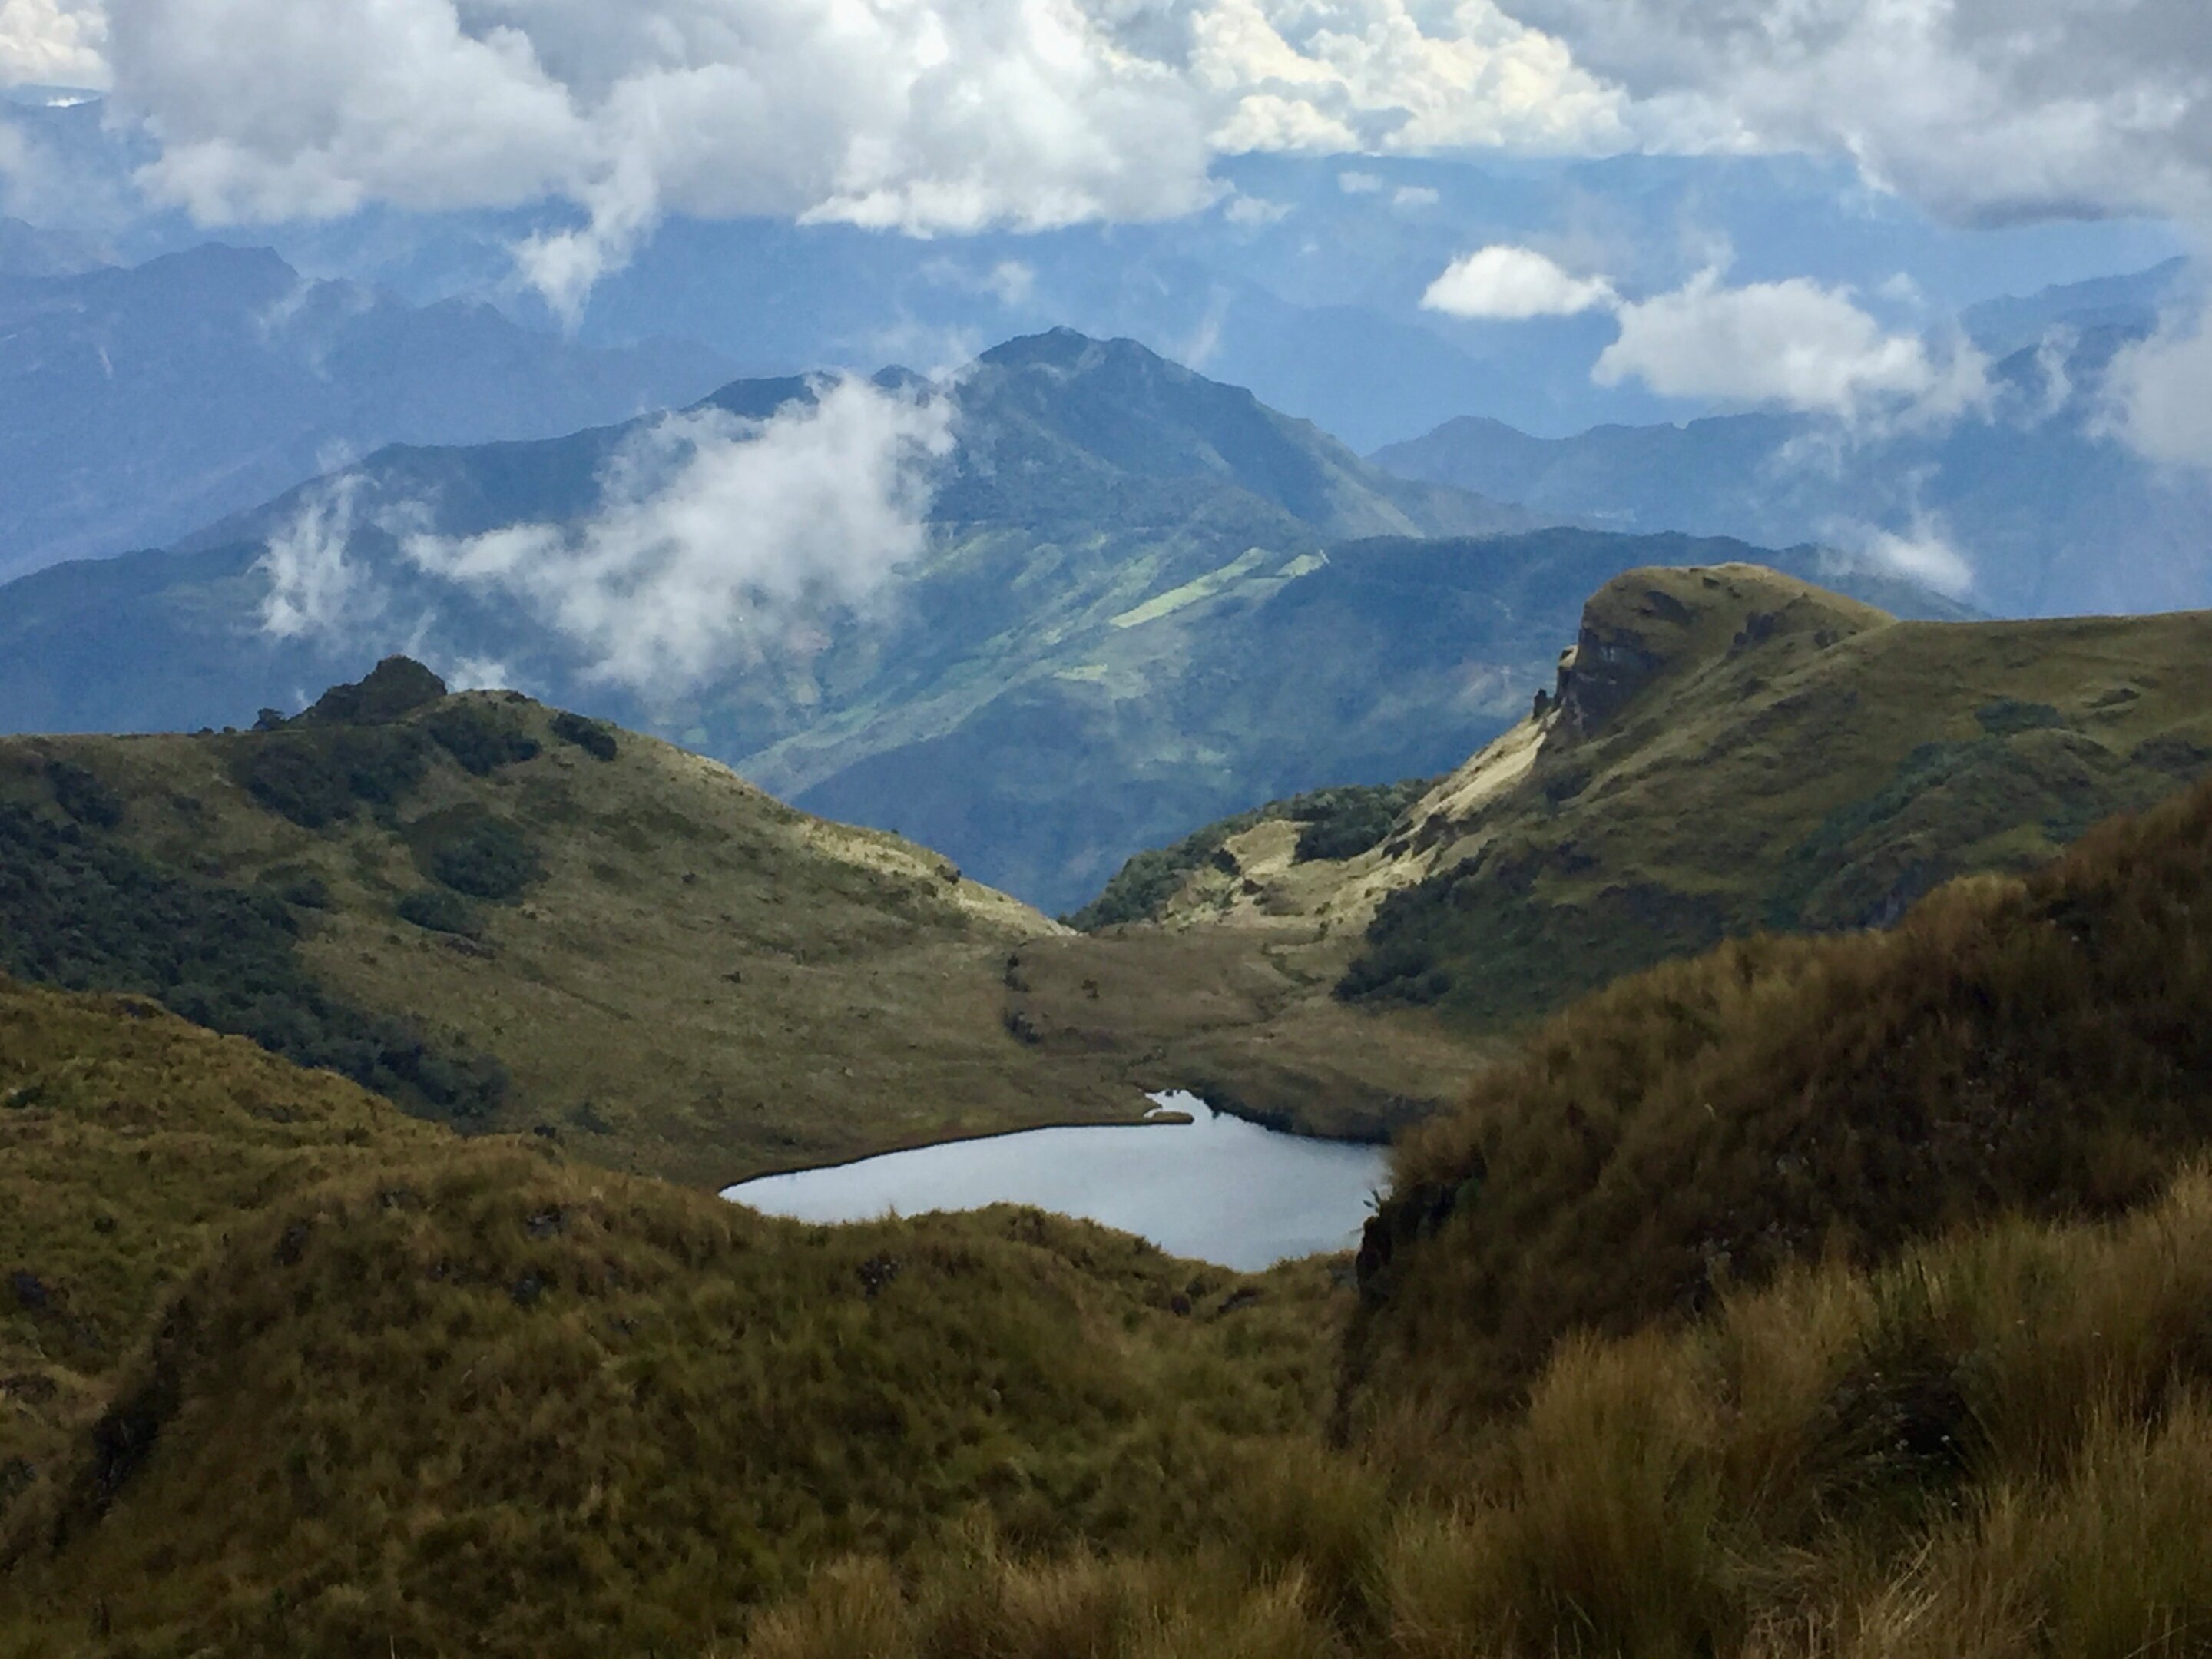 New study finds burning by humans and warming altered Andean ecosystems